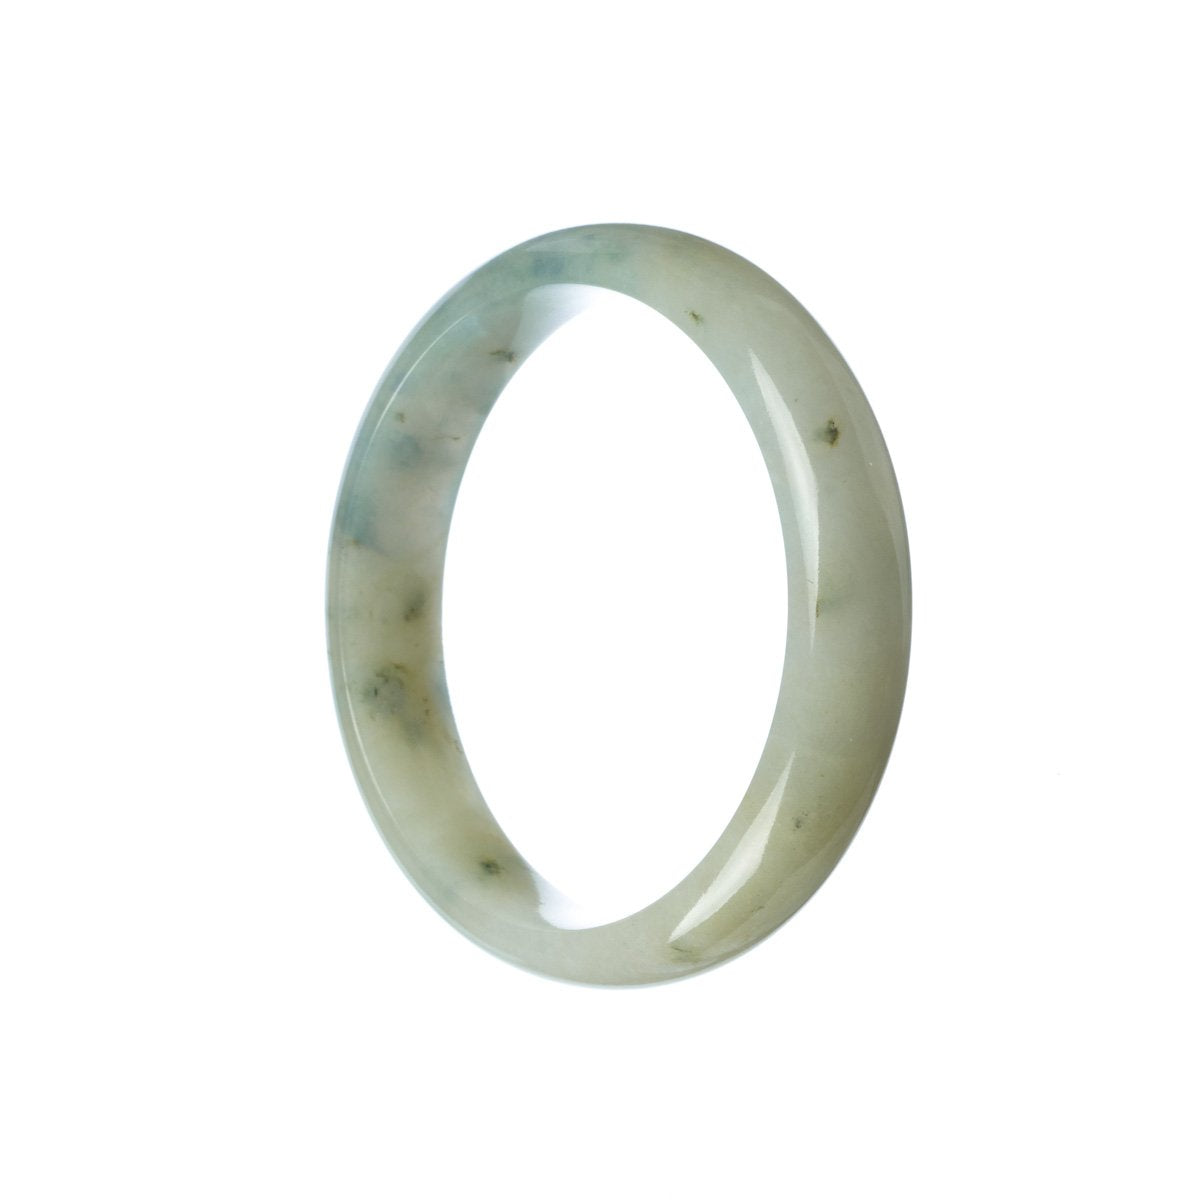 A close-up image of a white jade bracelet with a half moon shape, measuring 55mm. This bracelet is made from genuine Grade A Burmese jade and is produced by the brand MAYS™.